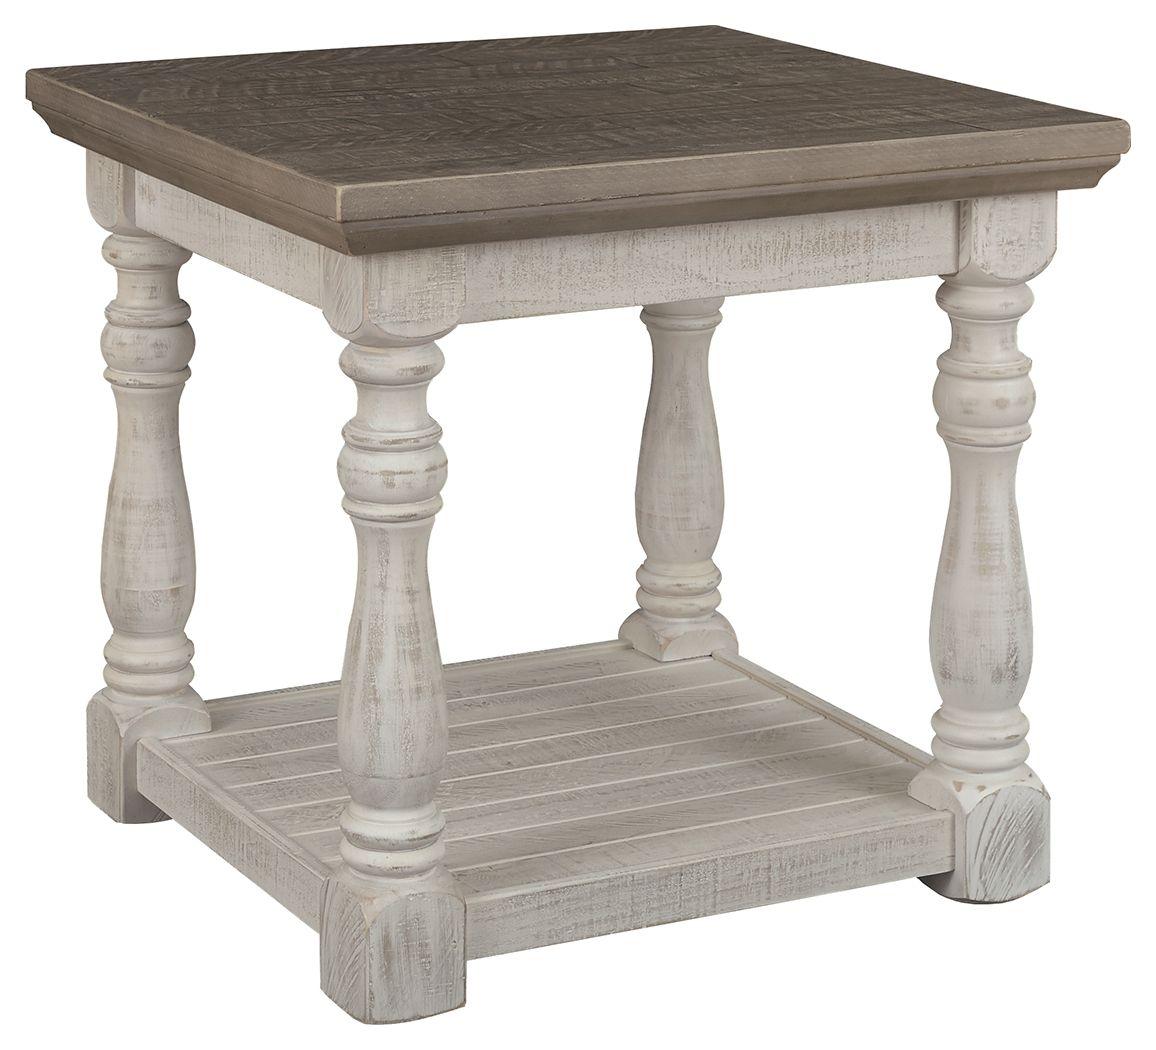 Havalance - Gray / White - Rectangular End Table Tony's Home Furnishings Furniture. Beds. Dressers. Sofas.